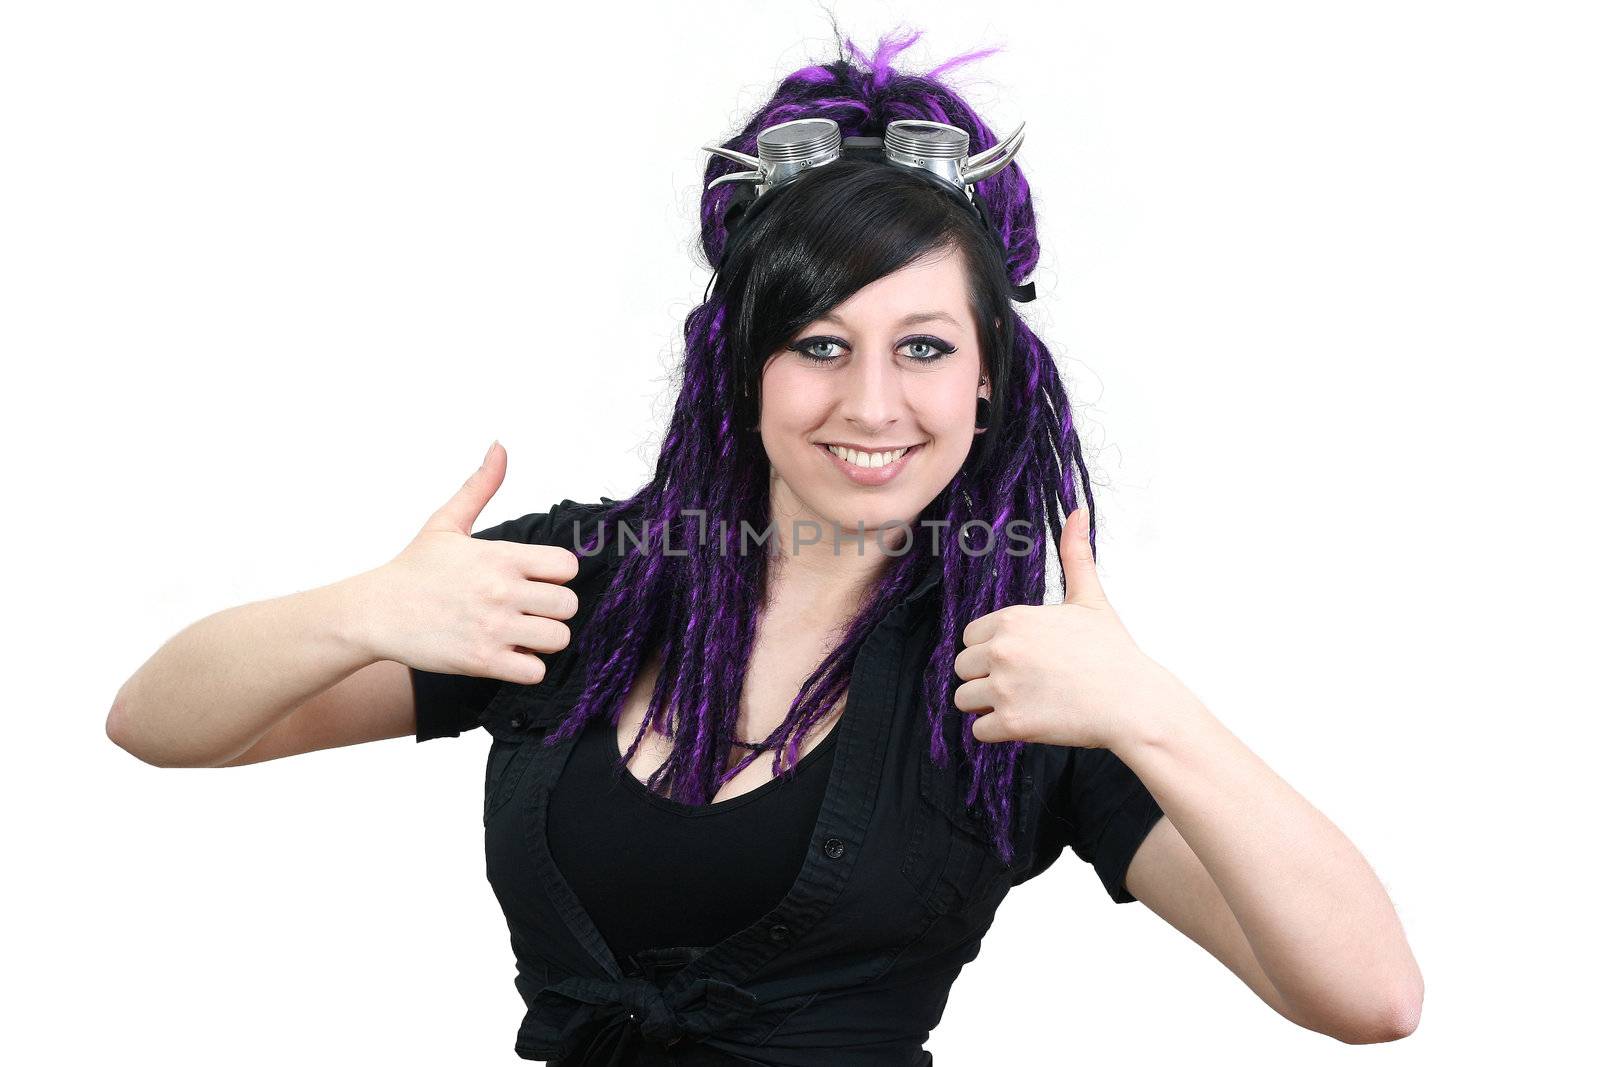 gothic girl with cyberlox and cyber goggle showing the thumb up gesture - isolated on withe background